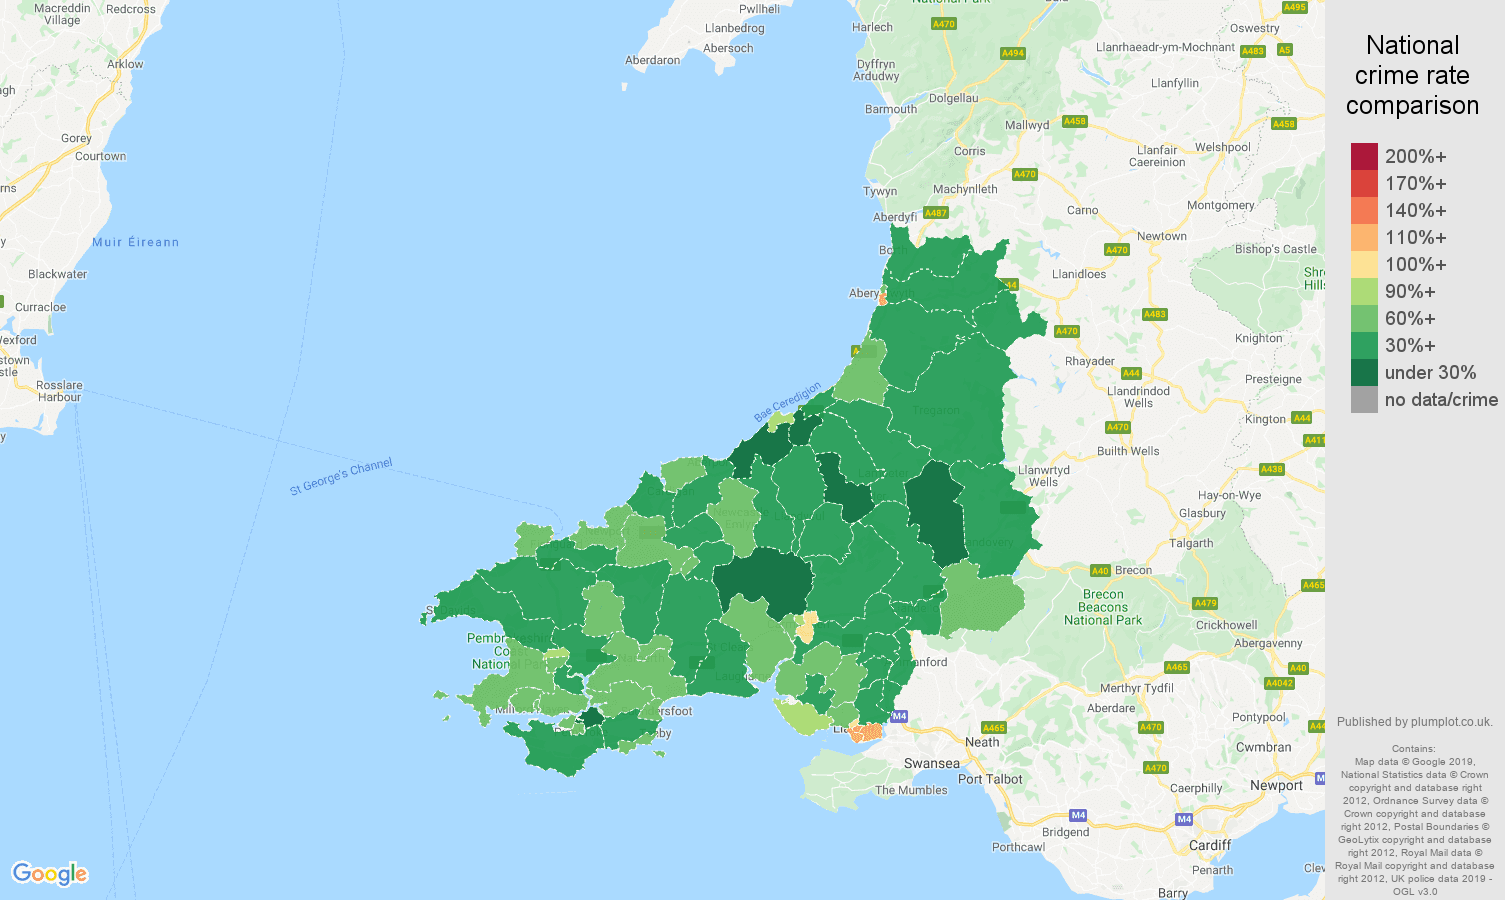 Dyfed other theft crime rate comparison map